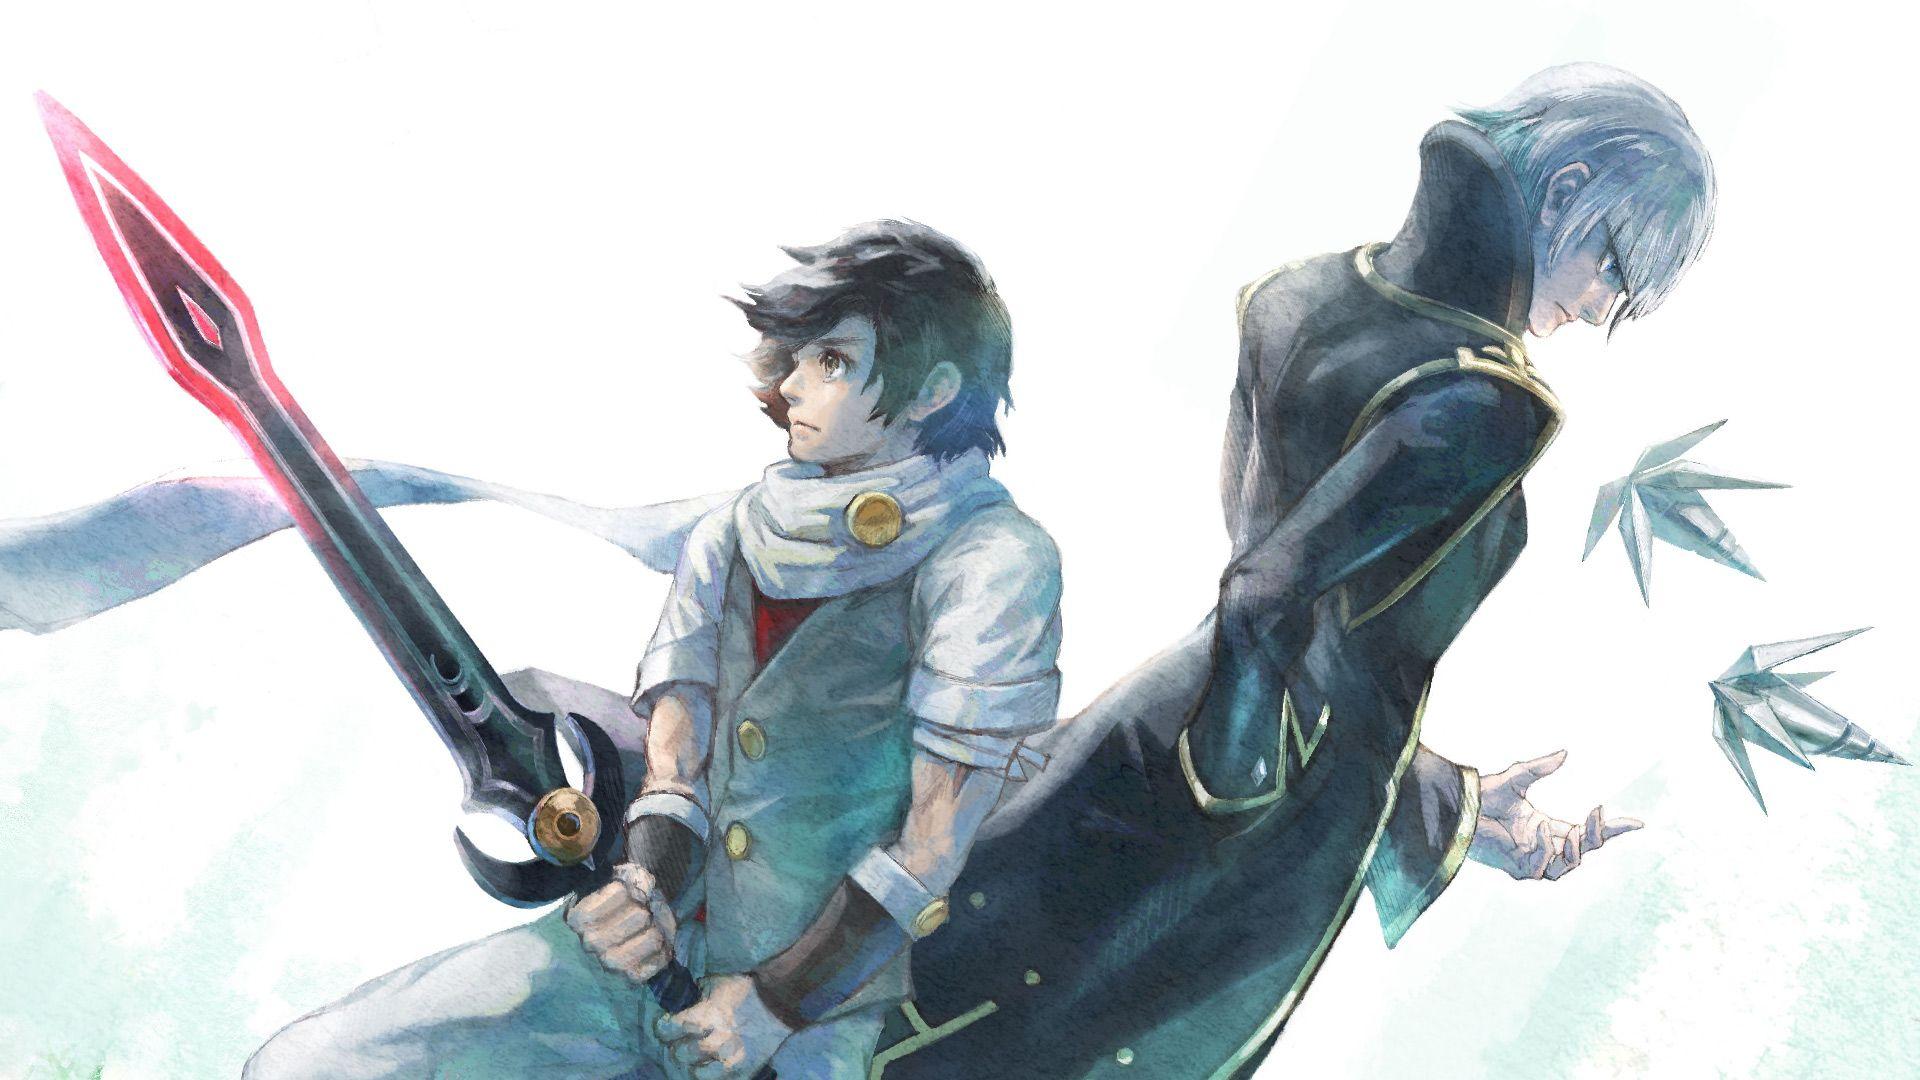 Lost Sphear of greater worlds